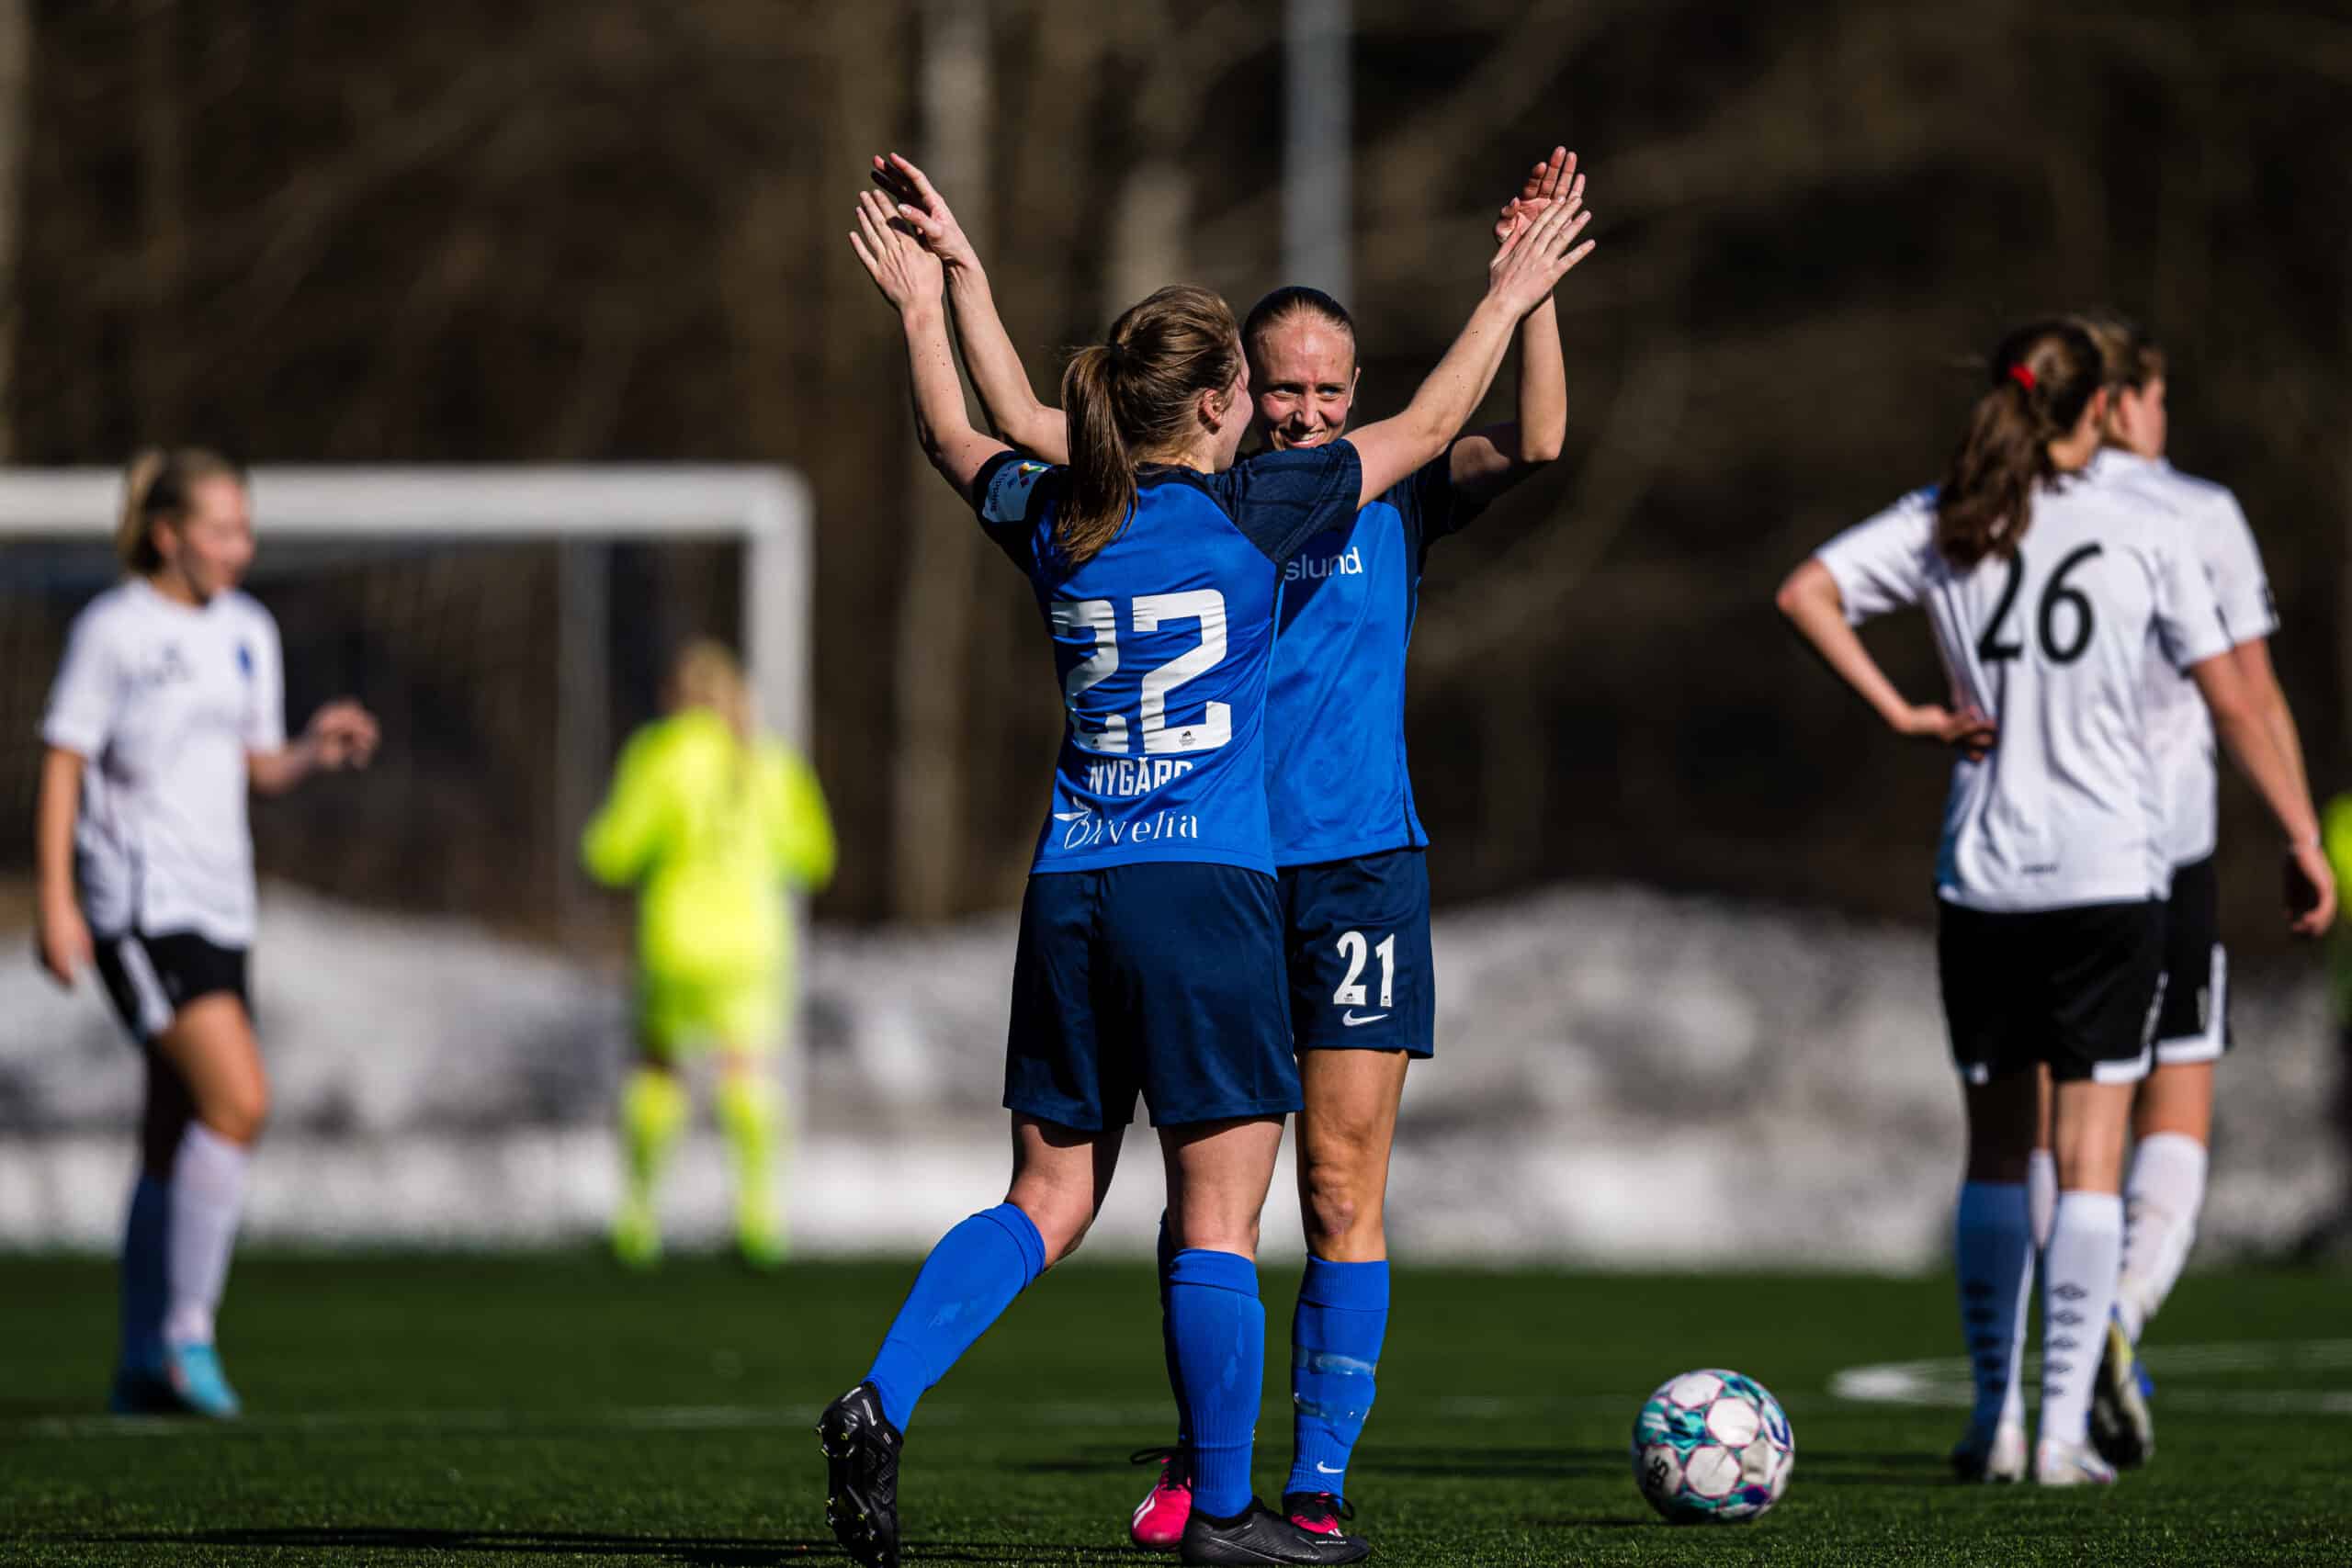 230422 Kamilla Børve Nygård and Celina Opland Smith of Grei celebrates after the 1. division football match between Grei and Fyllingsdalen on April 22, 2023 in Oslo.
Photo: Marius Simensen / BILDBYRÅN / Cop 238